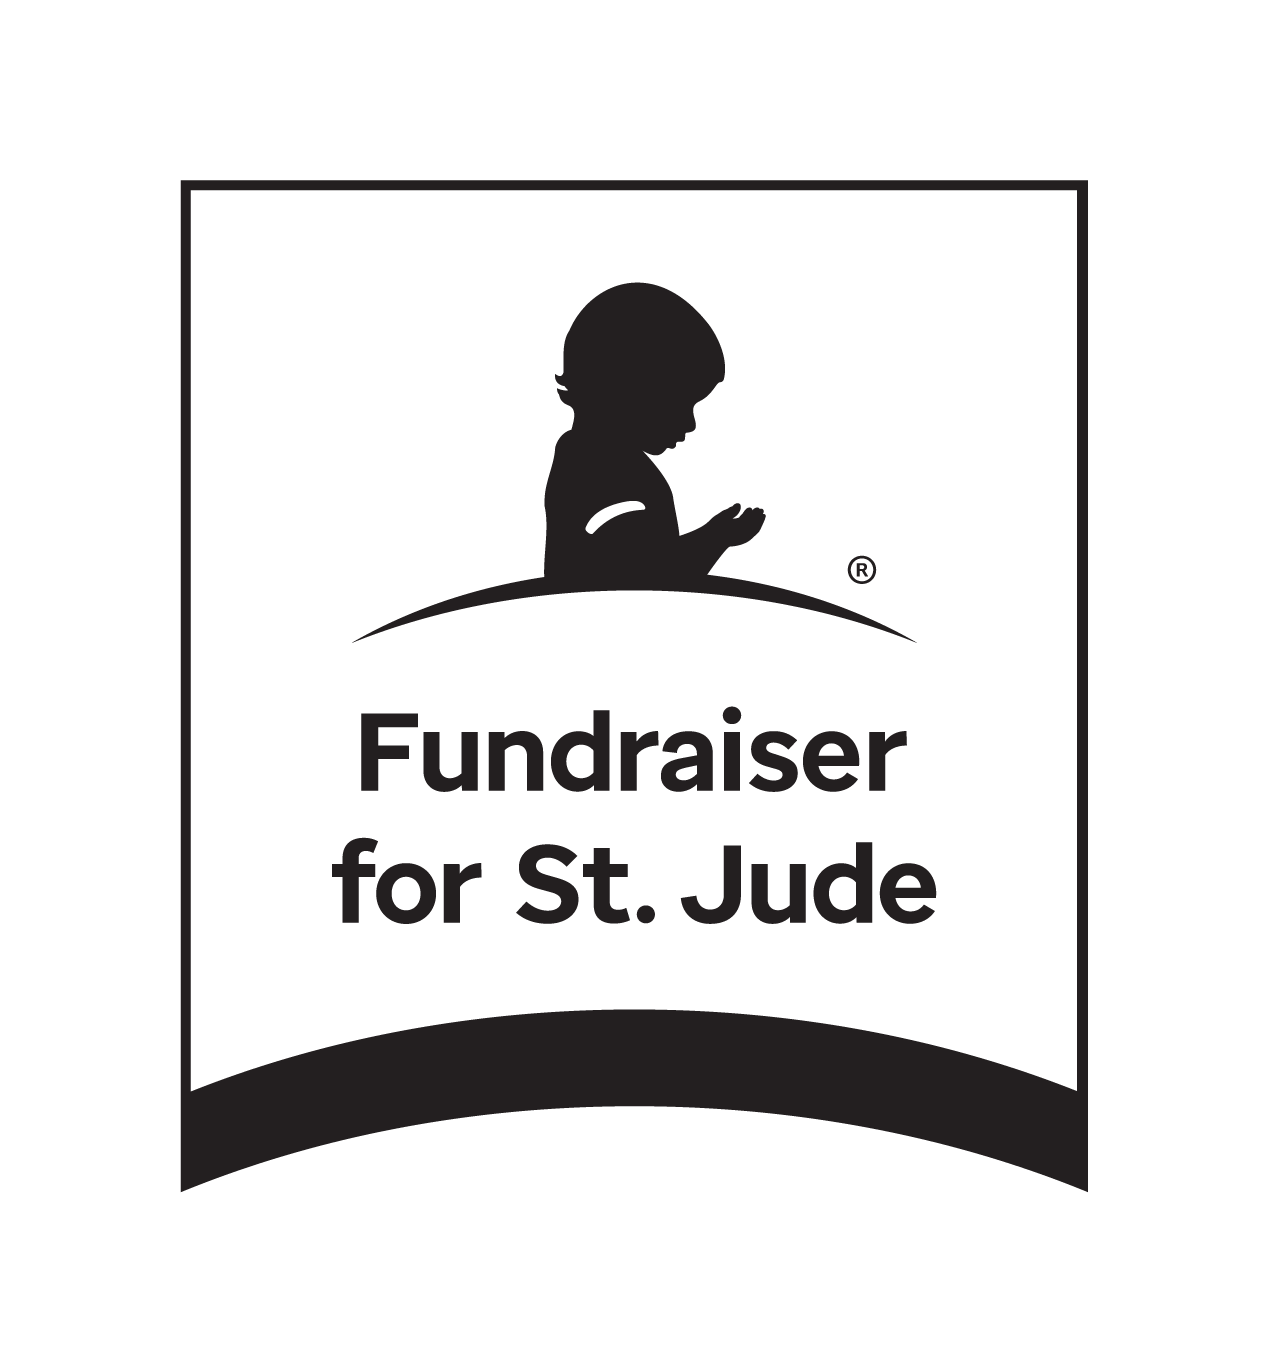 A black and white logo for a fundraiser for st. jude.